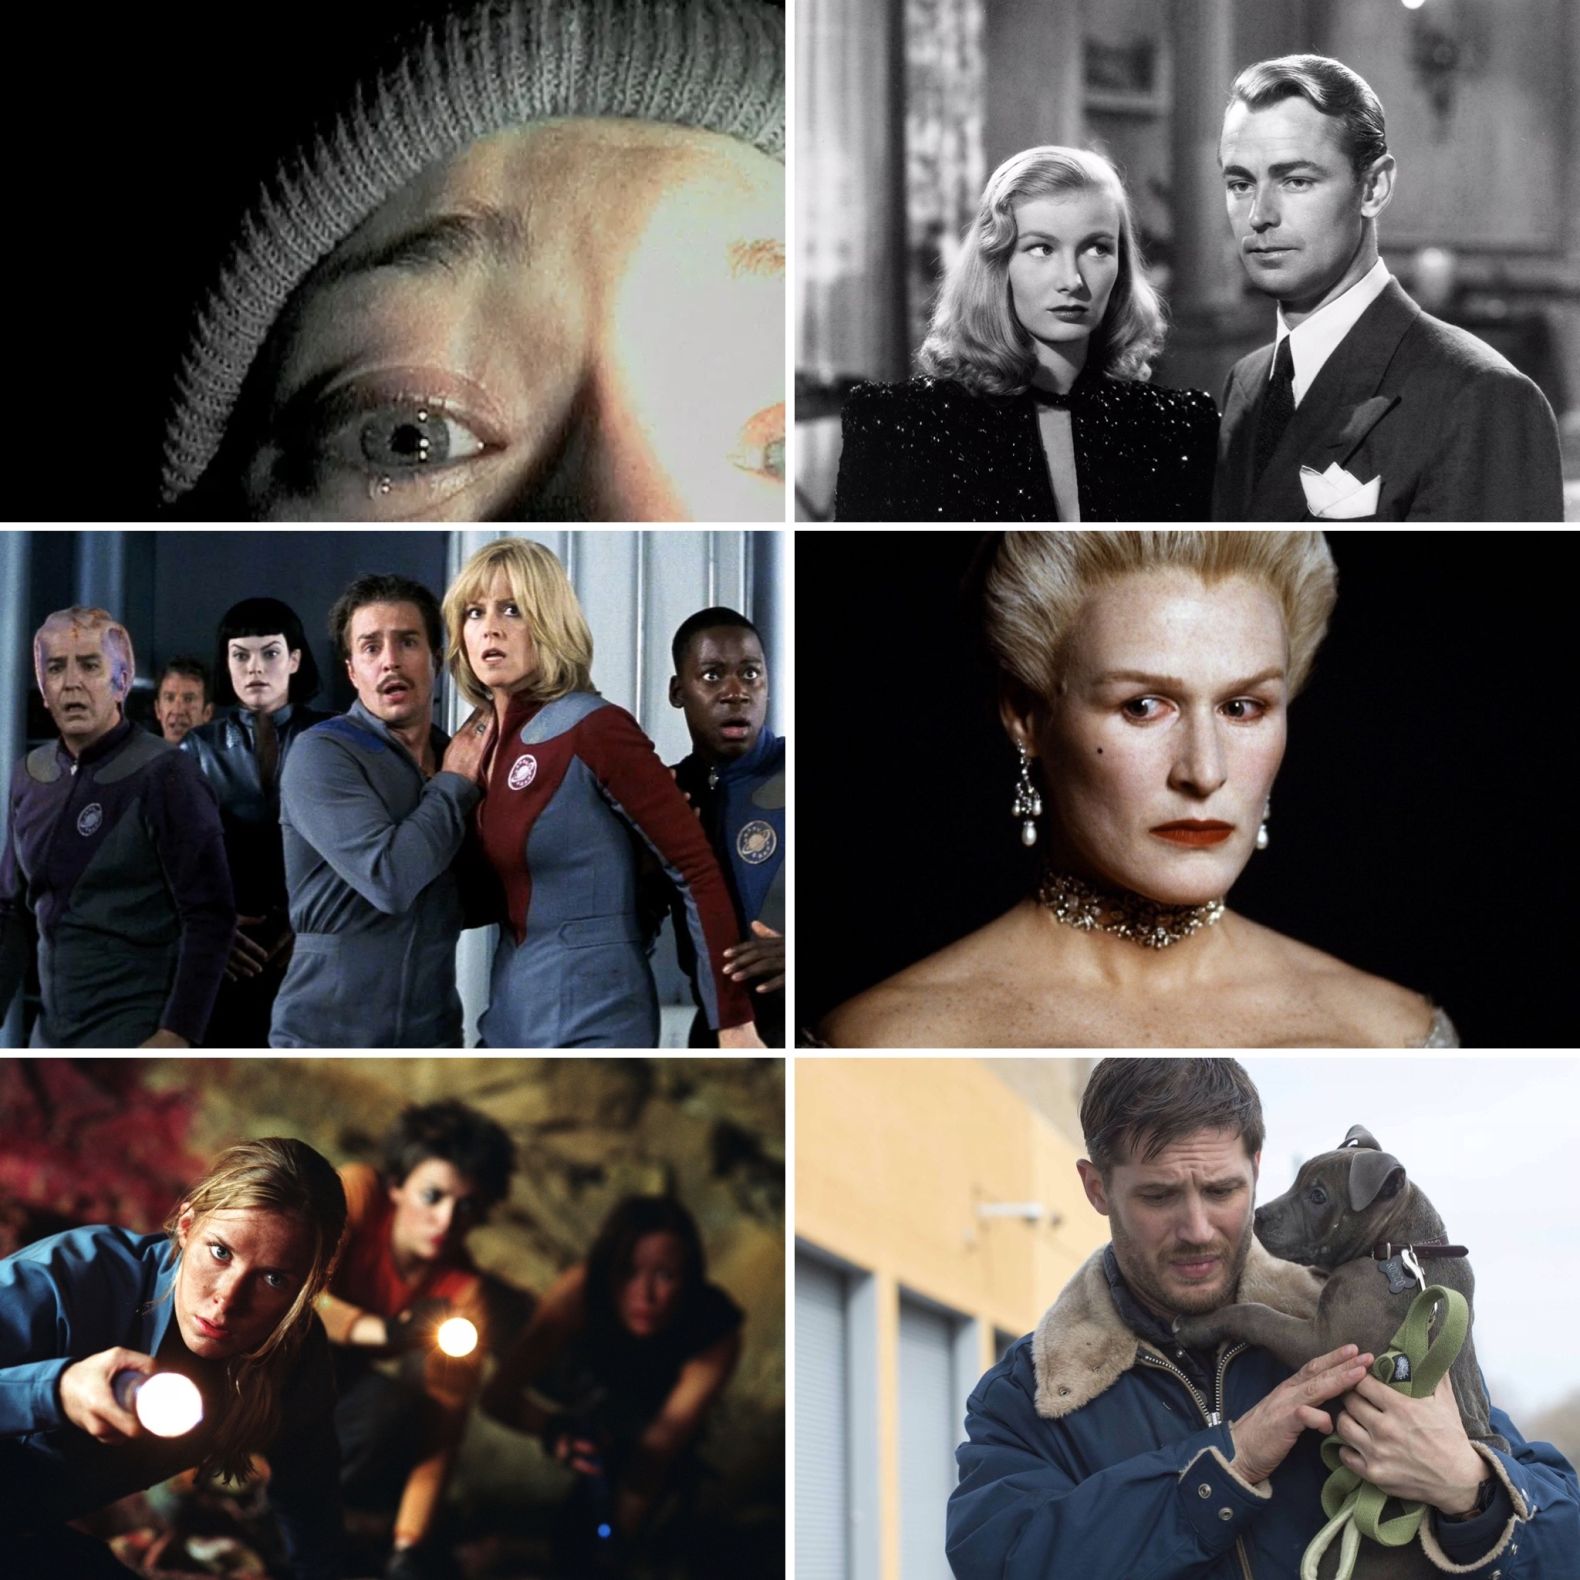 Duke Box #58: Our Guide to the Best Films on TV